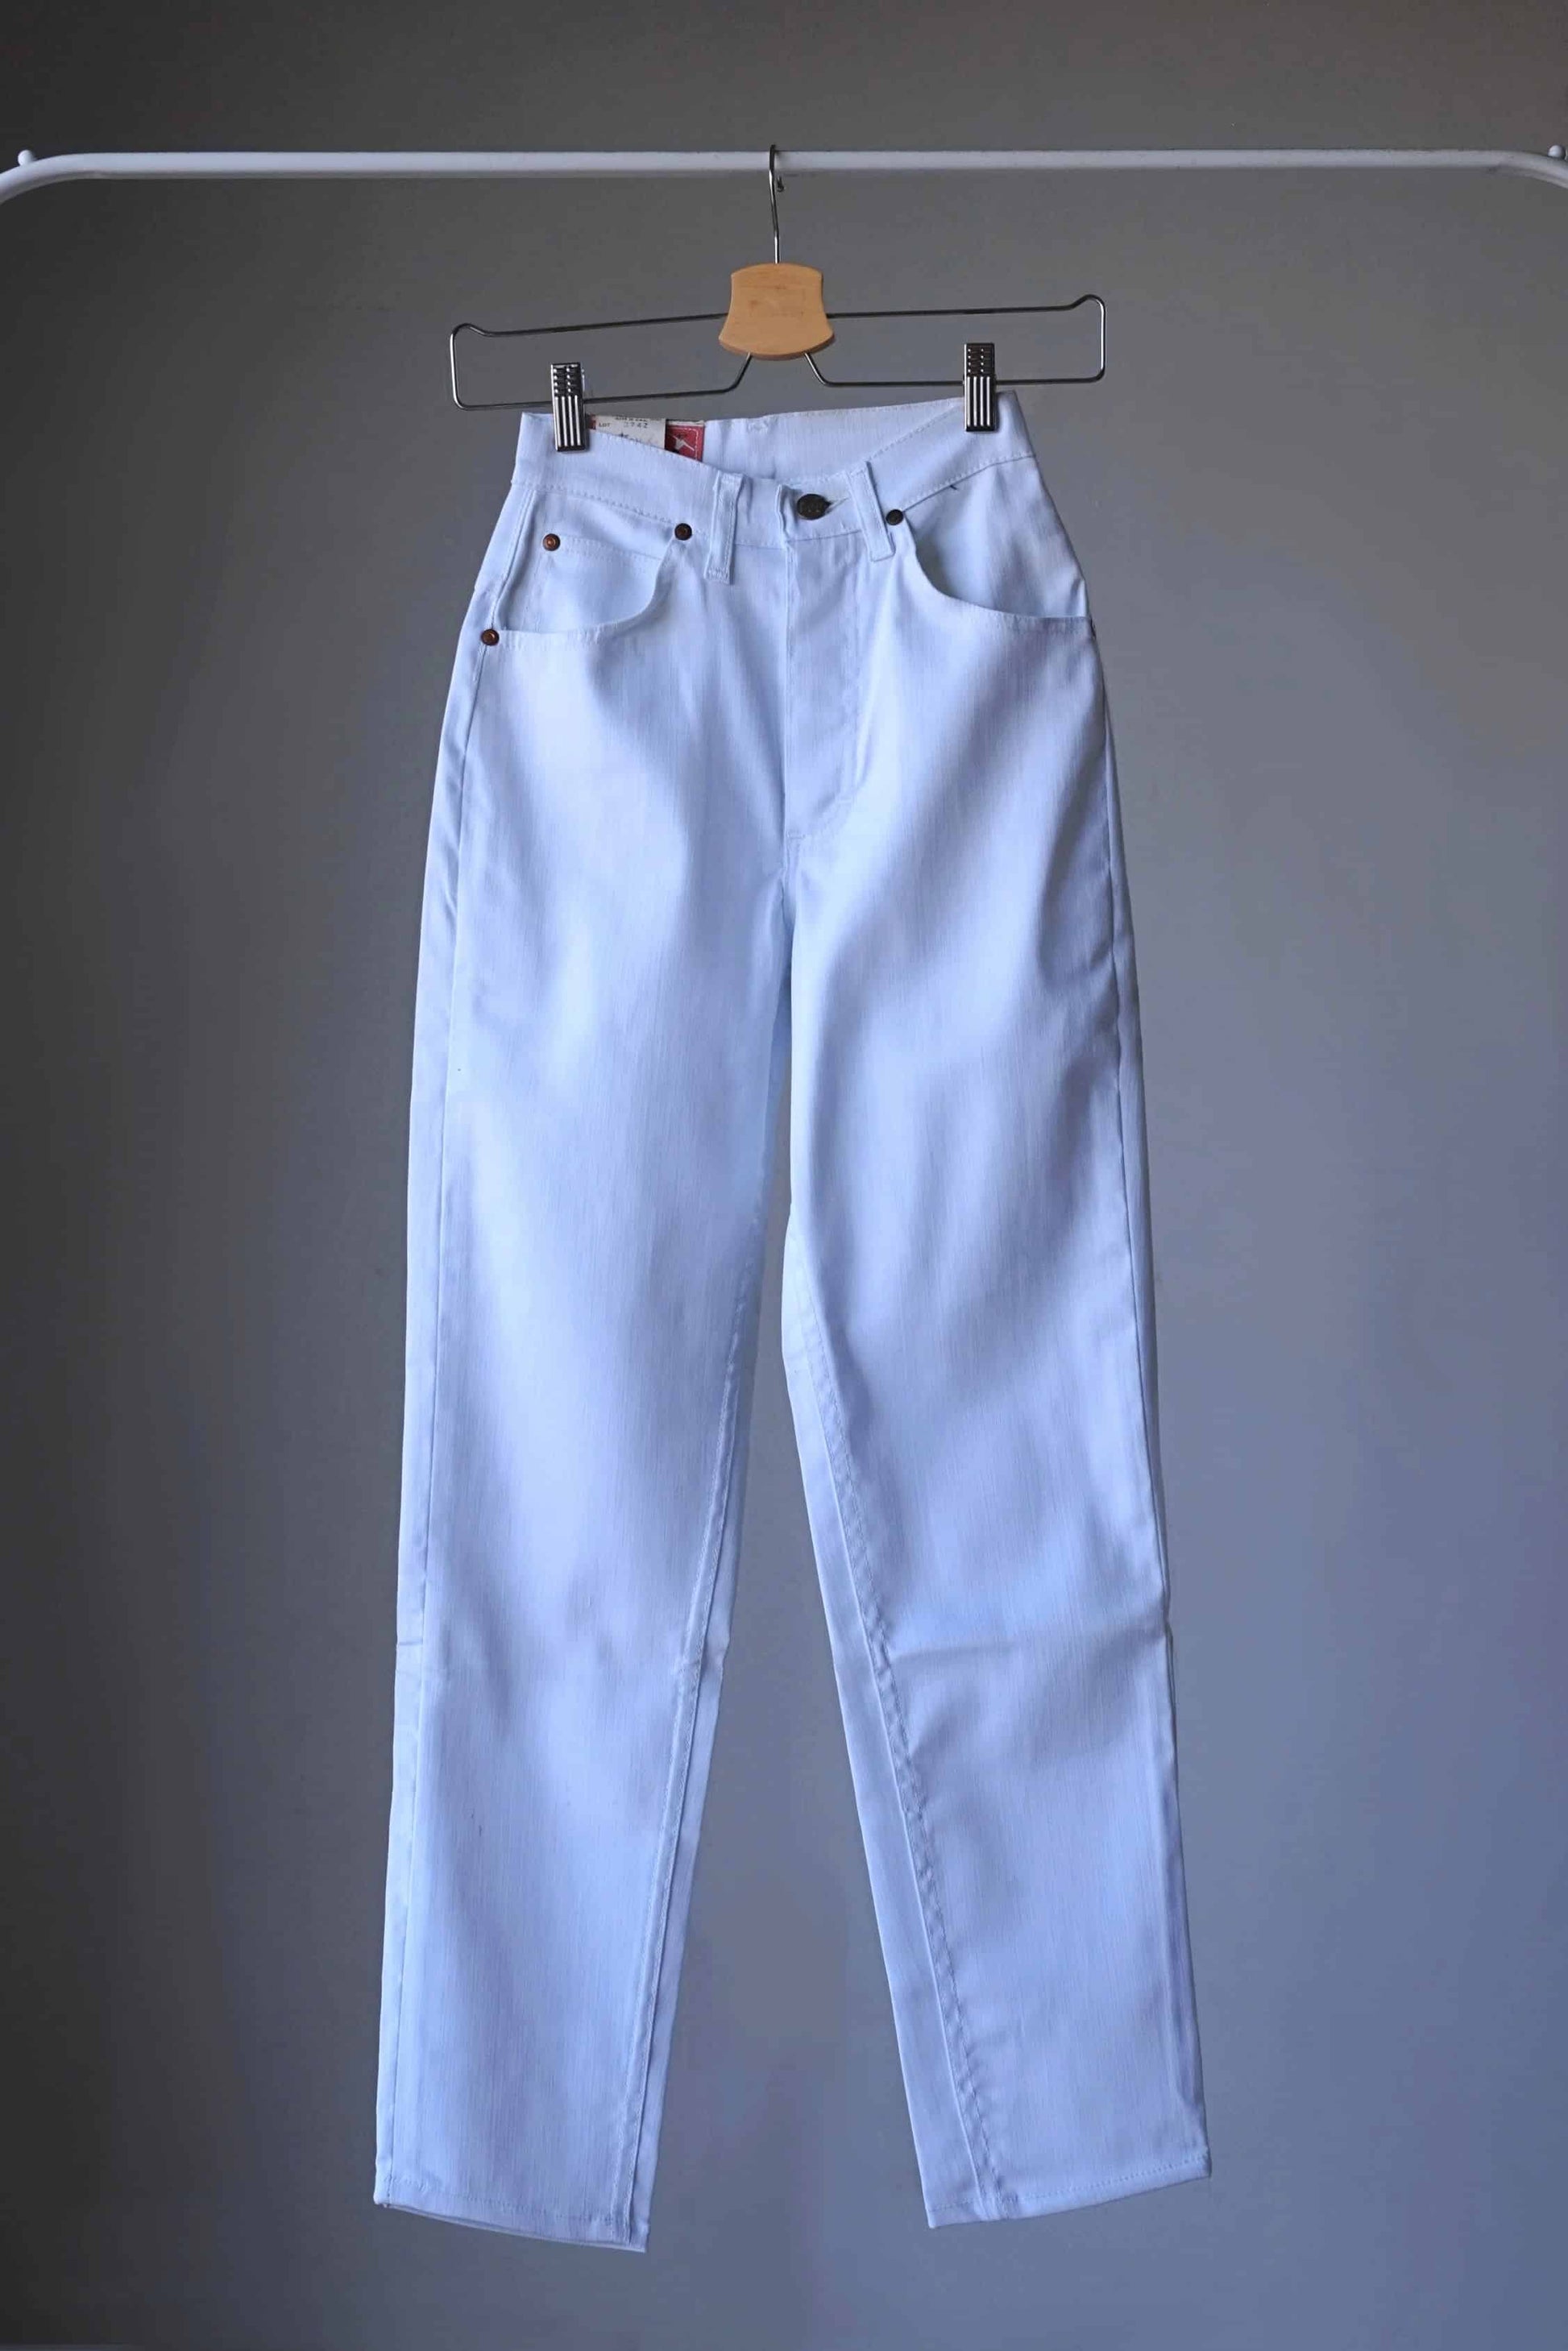 White LEE Vintage Stretch Riders Jeans on hanger